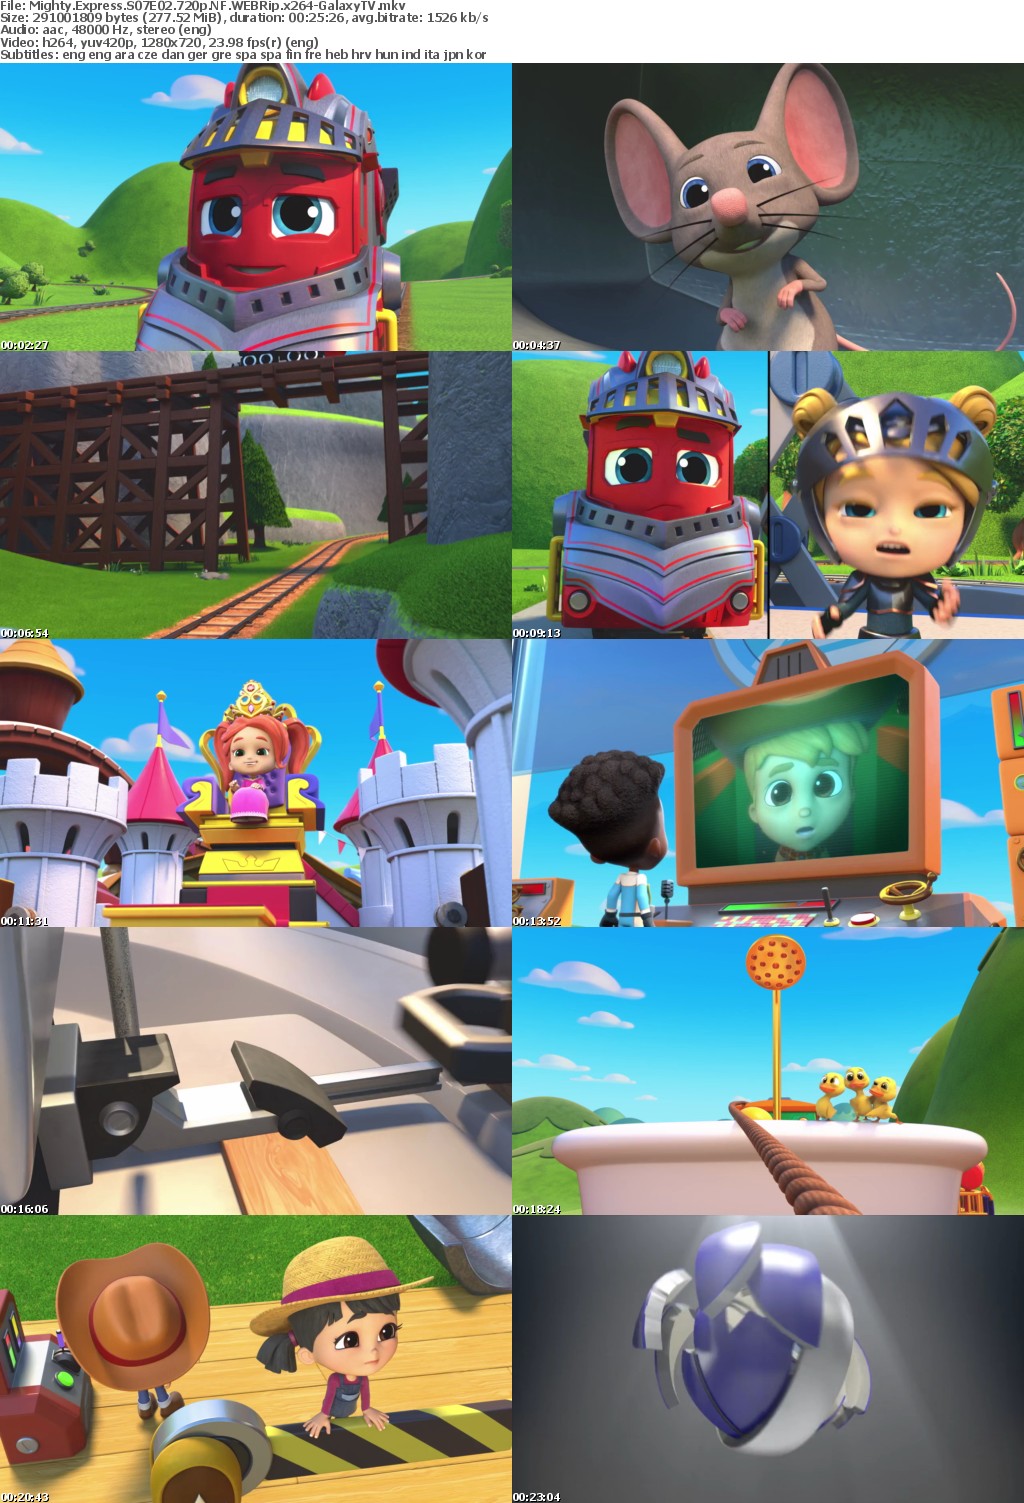 Mighty Express S07 COMPLETE 720p NF WEBRip x264-GalaxyTV